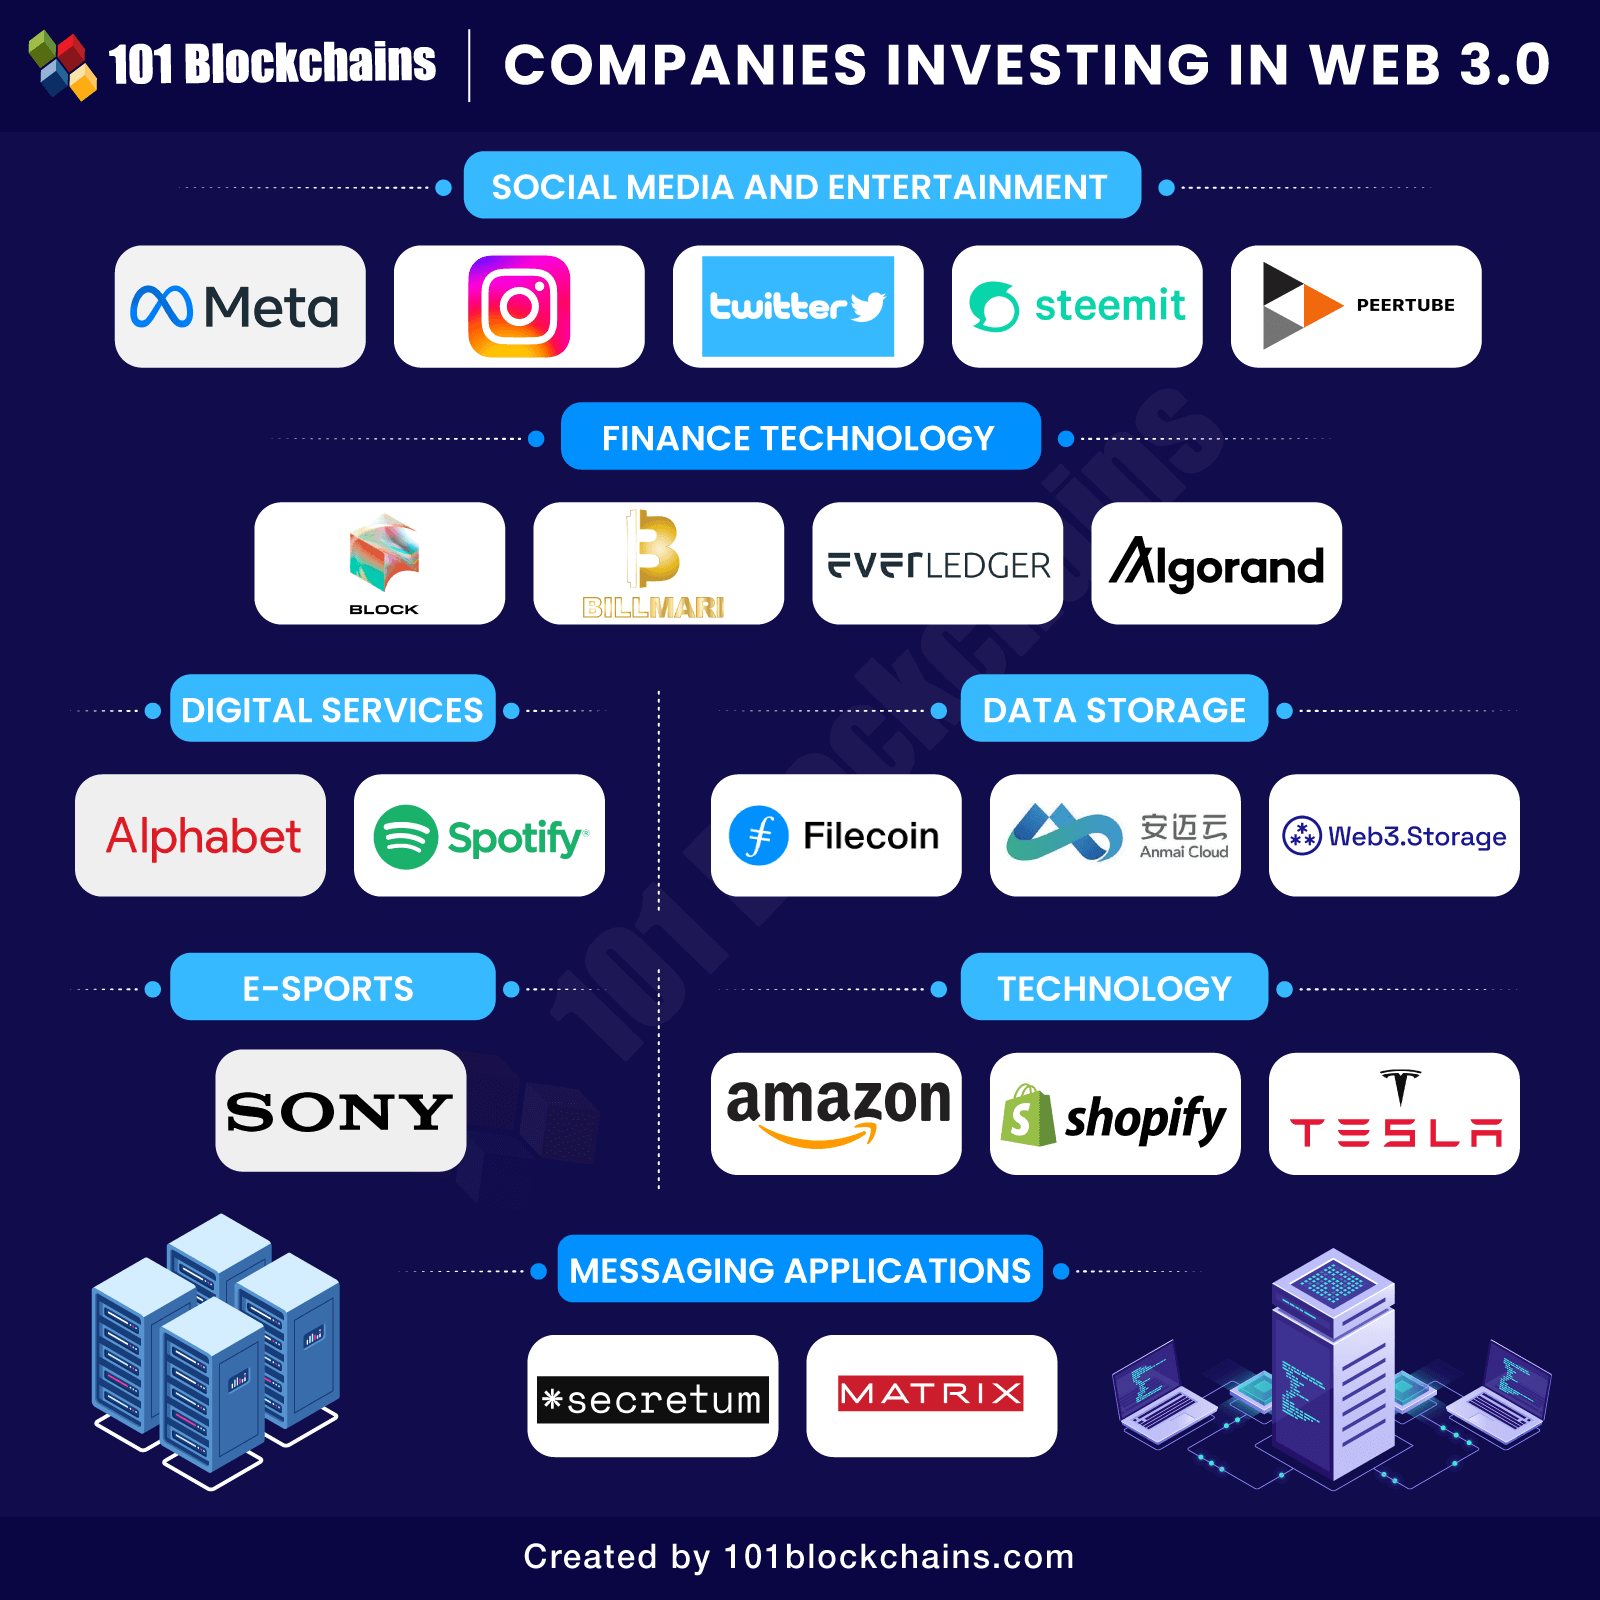 COMPANIES INVESTING IN WEB 3.0